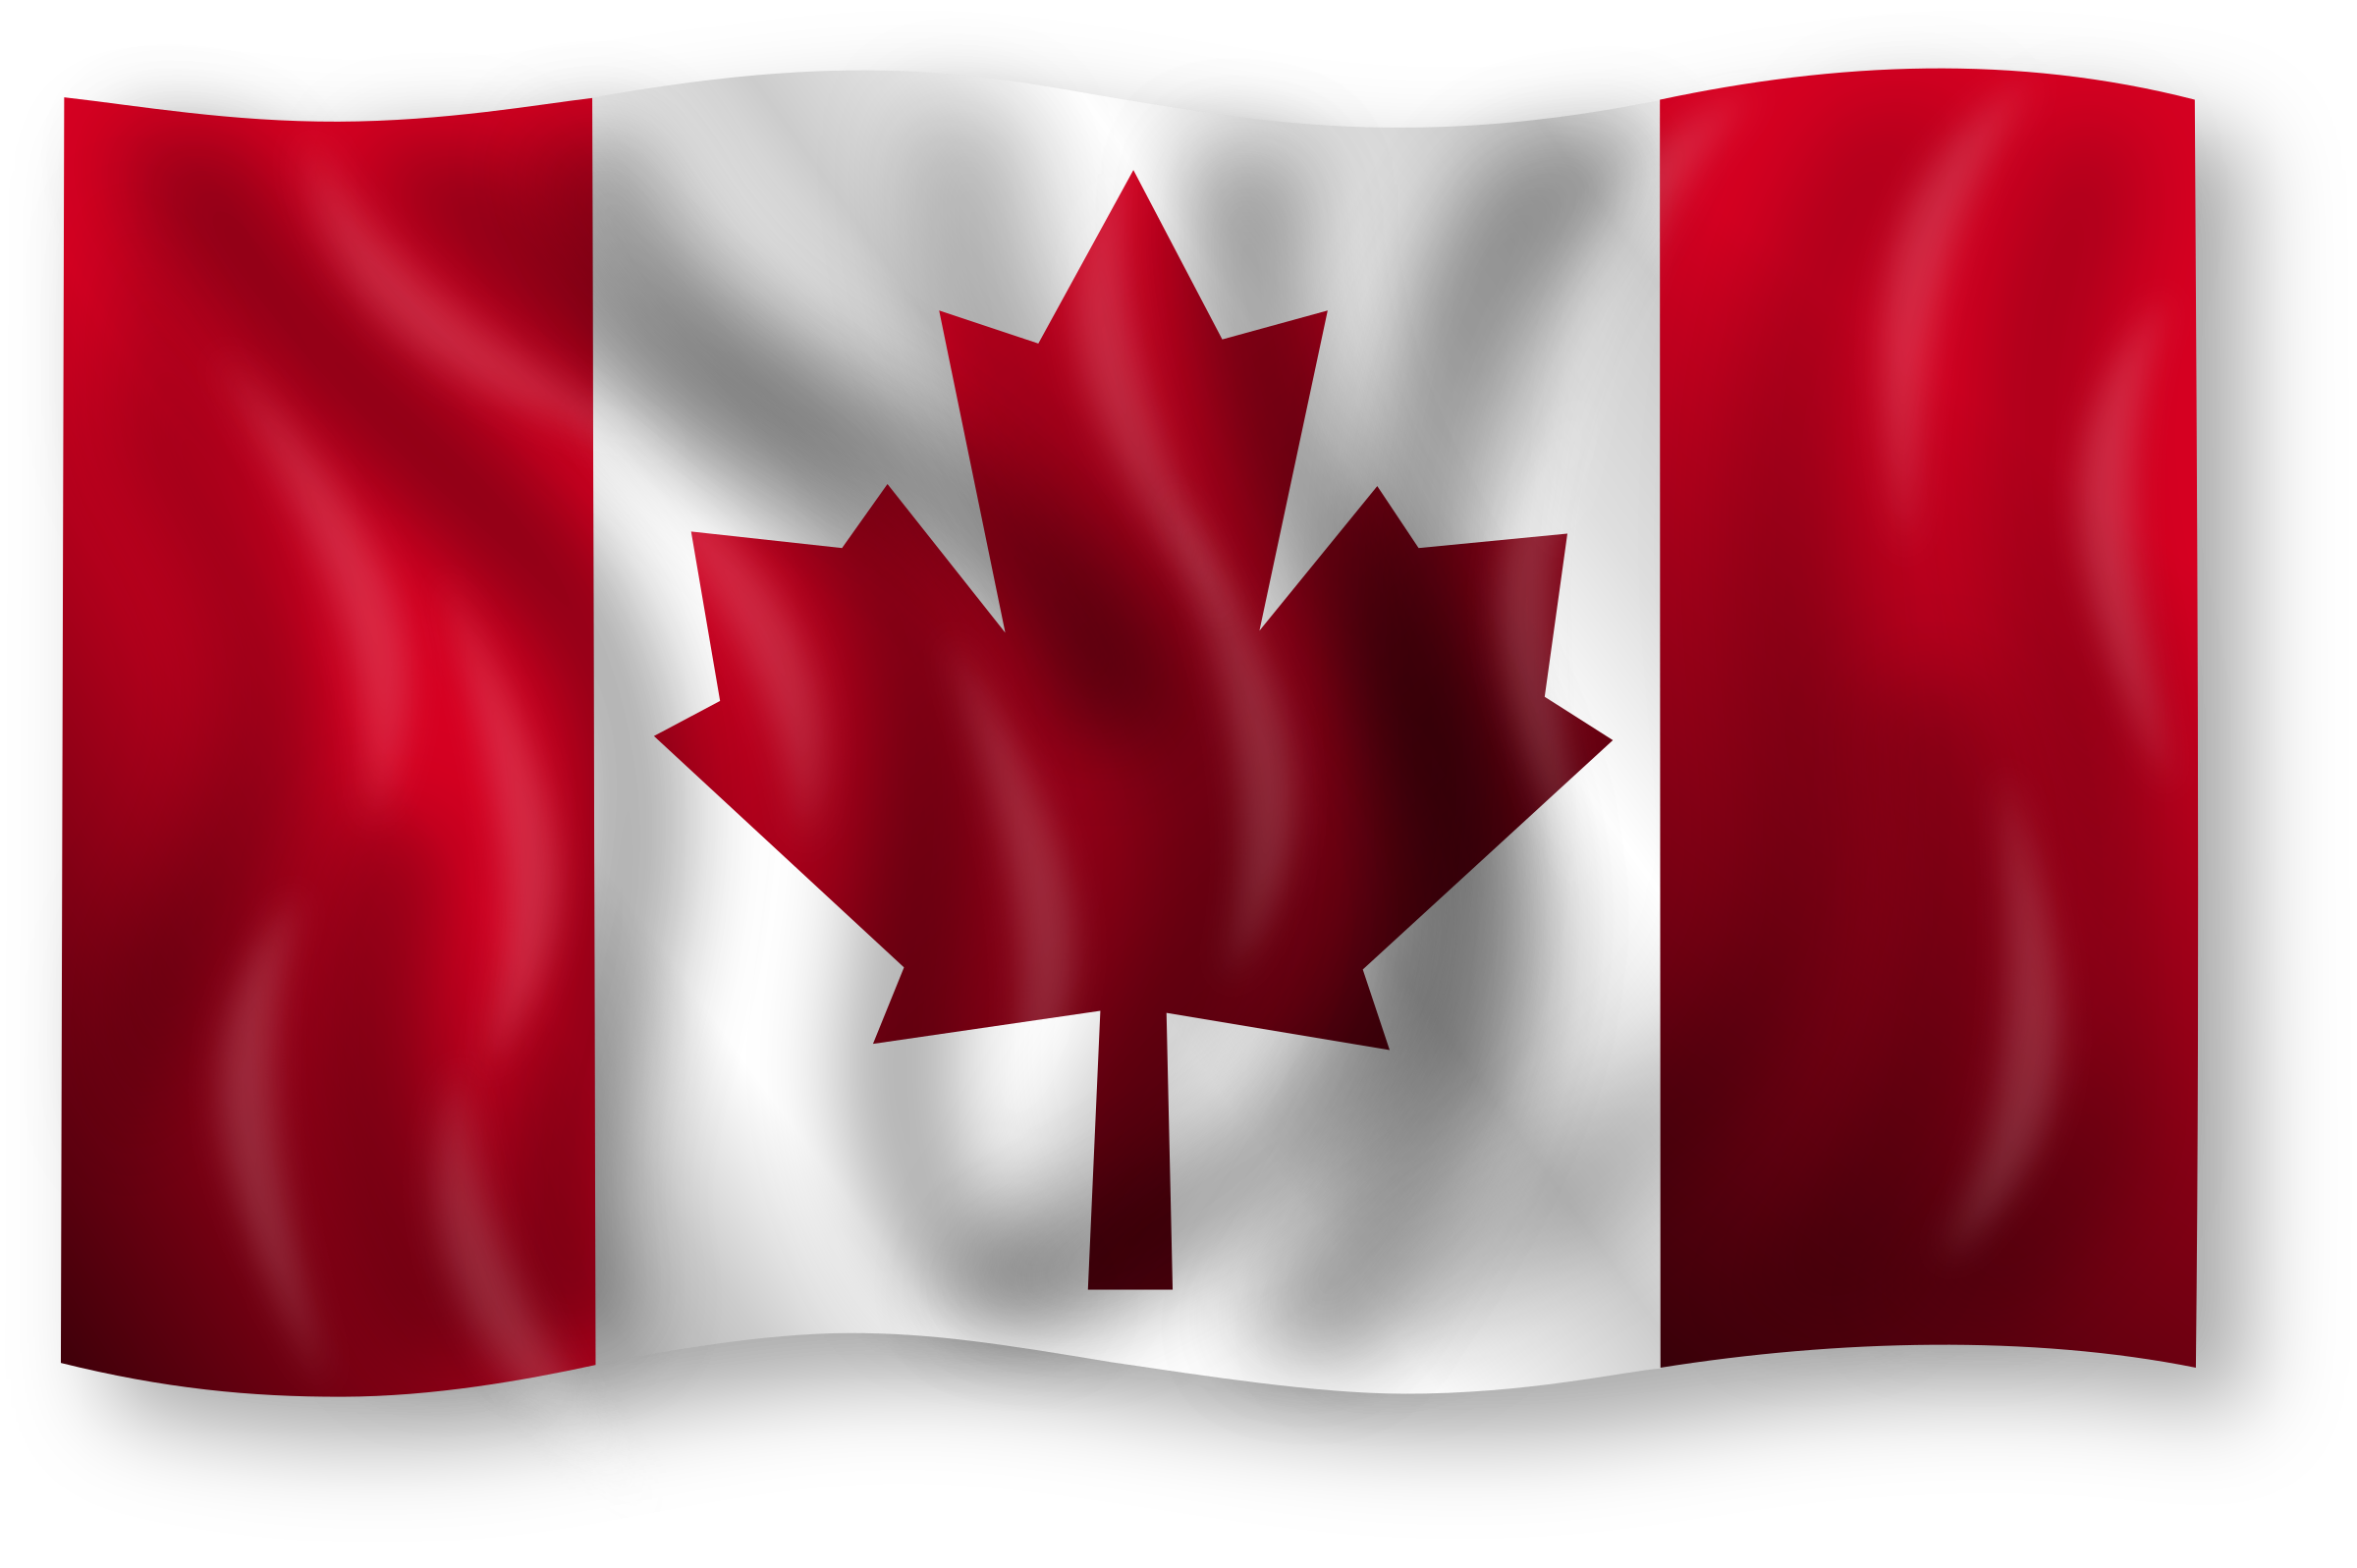 Canada flag PNG